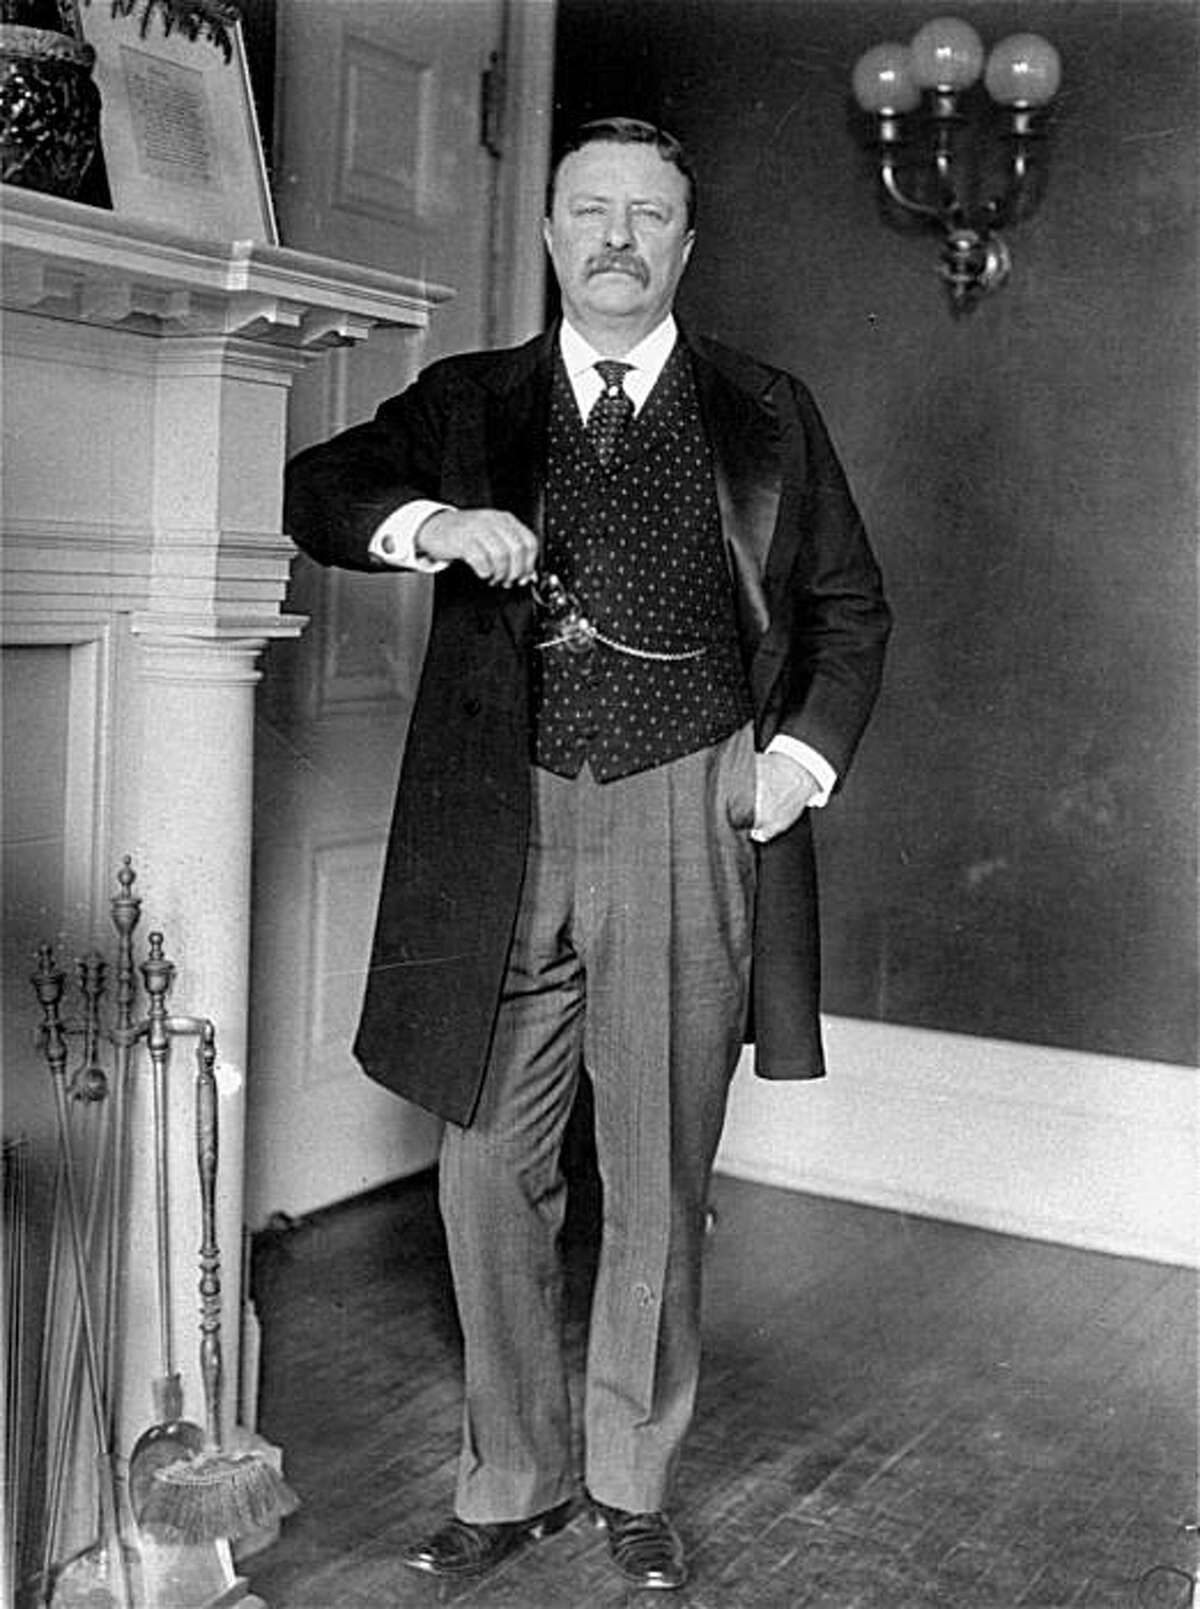 ** FILE ** In this 1908 file photo, President Theodore Roosevelt stands in the White House. (AP Photo)